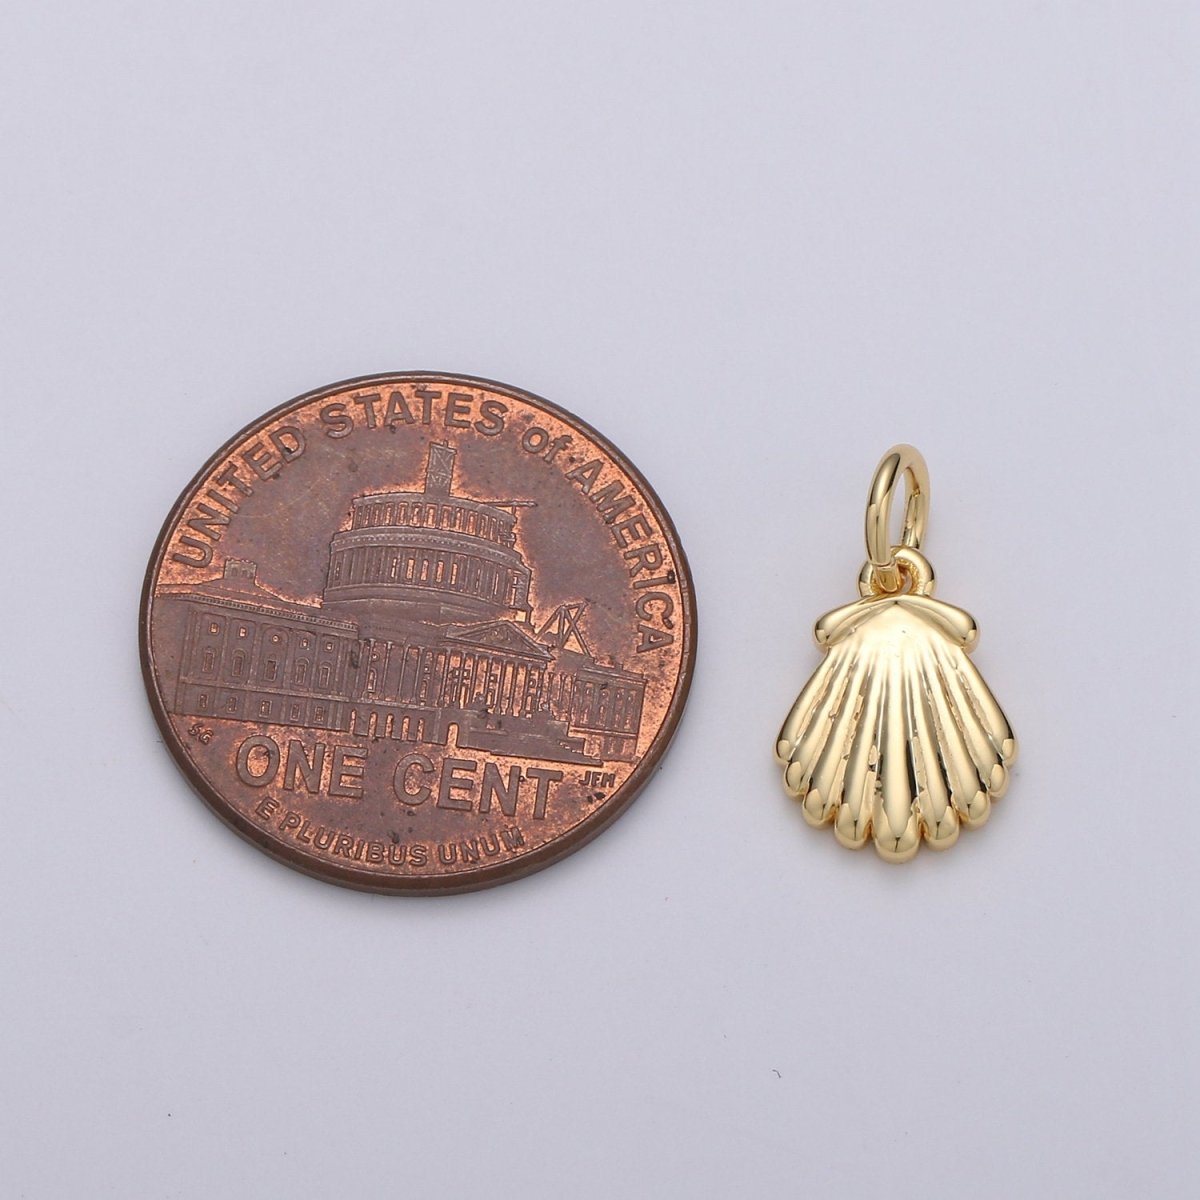 OS Tiny Shell Charm Gold Sea Shell Pendant for Bracelet Earring Necklace Component D-588 - DLUXCA